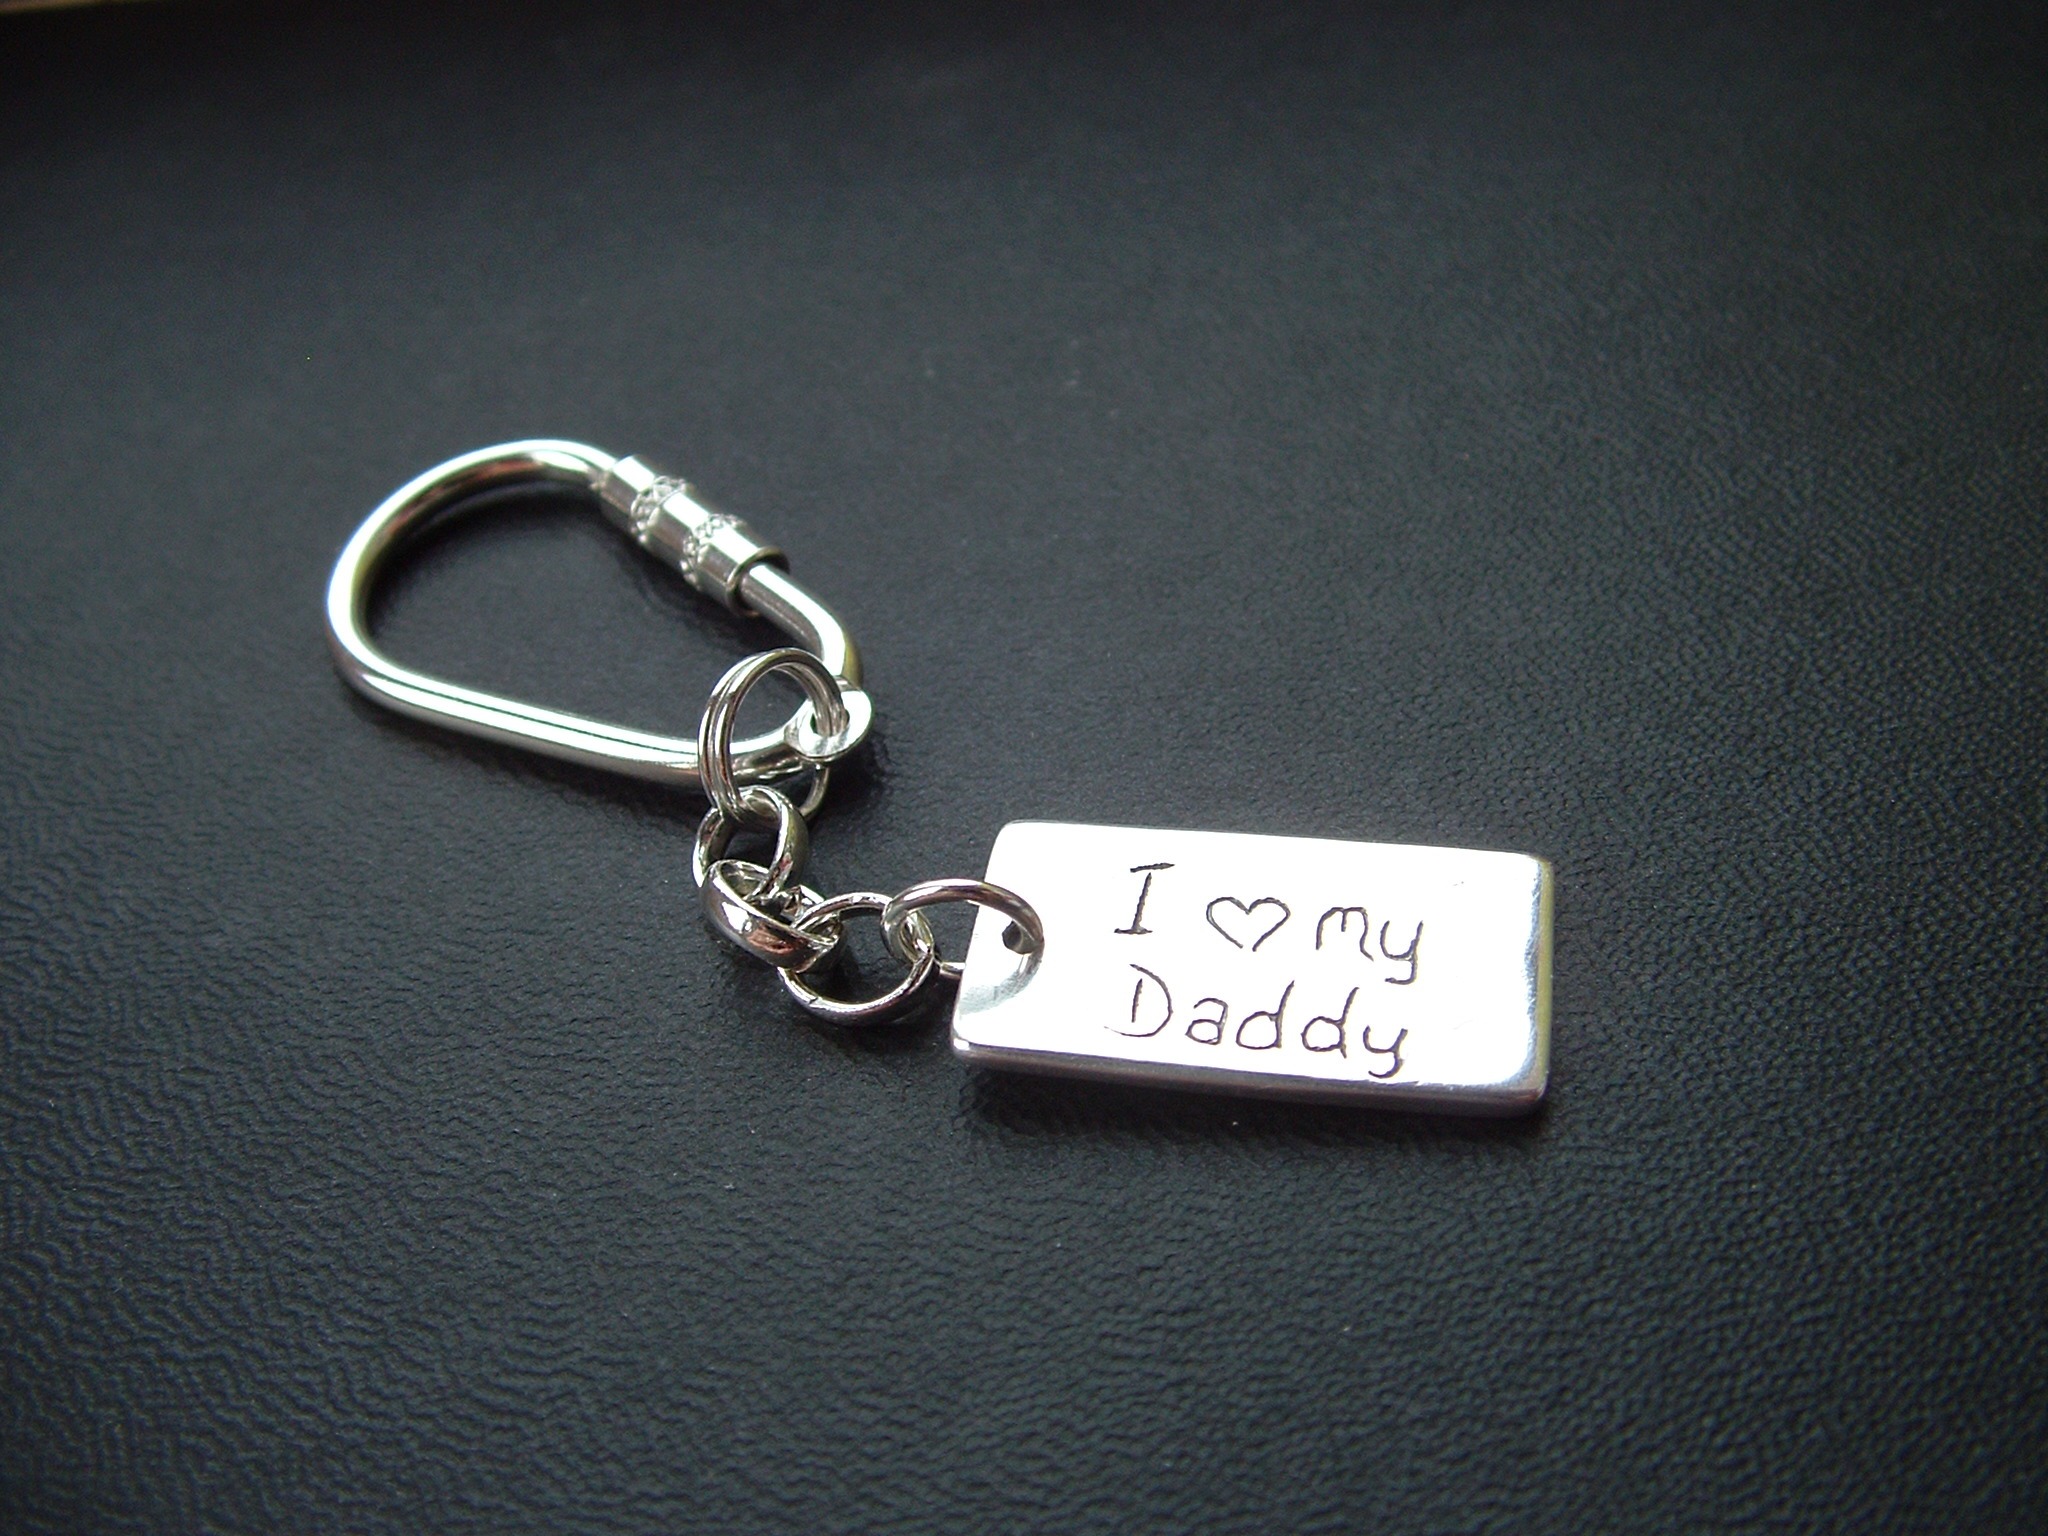 i love my dad wallpaper,fashion accessory,keychain,silver,material property,font